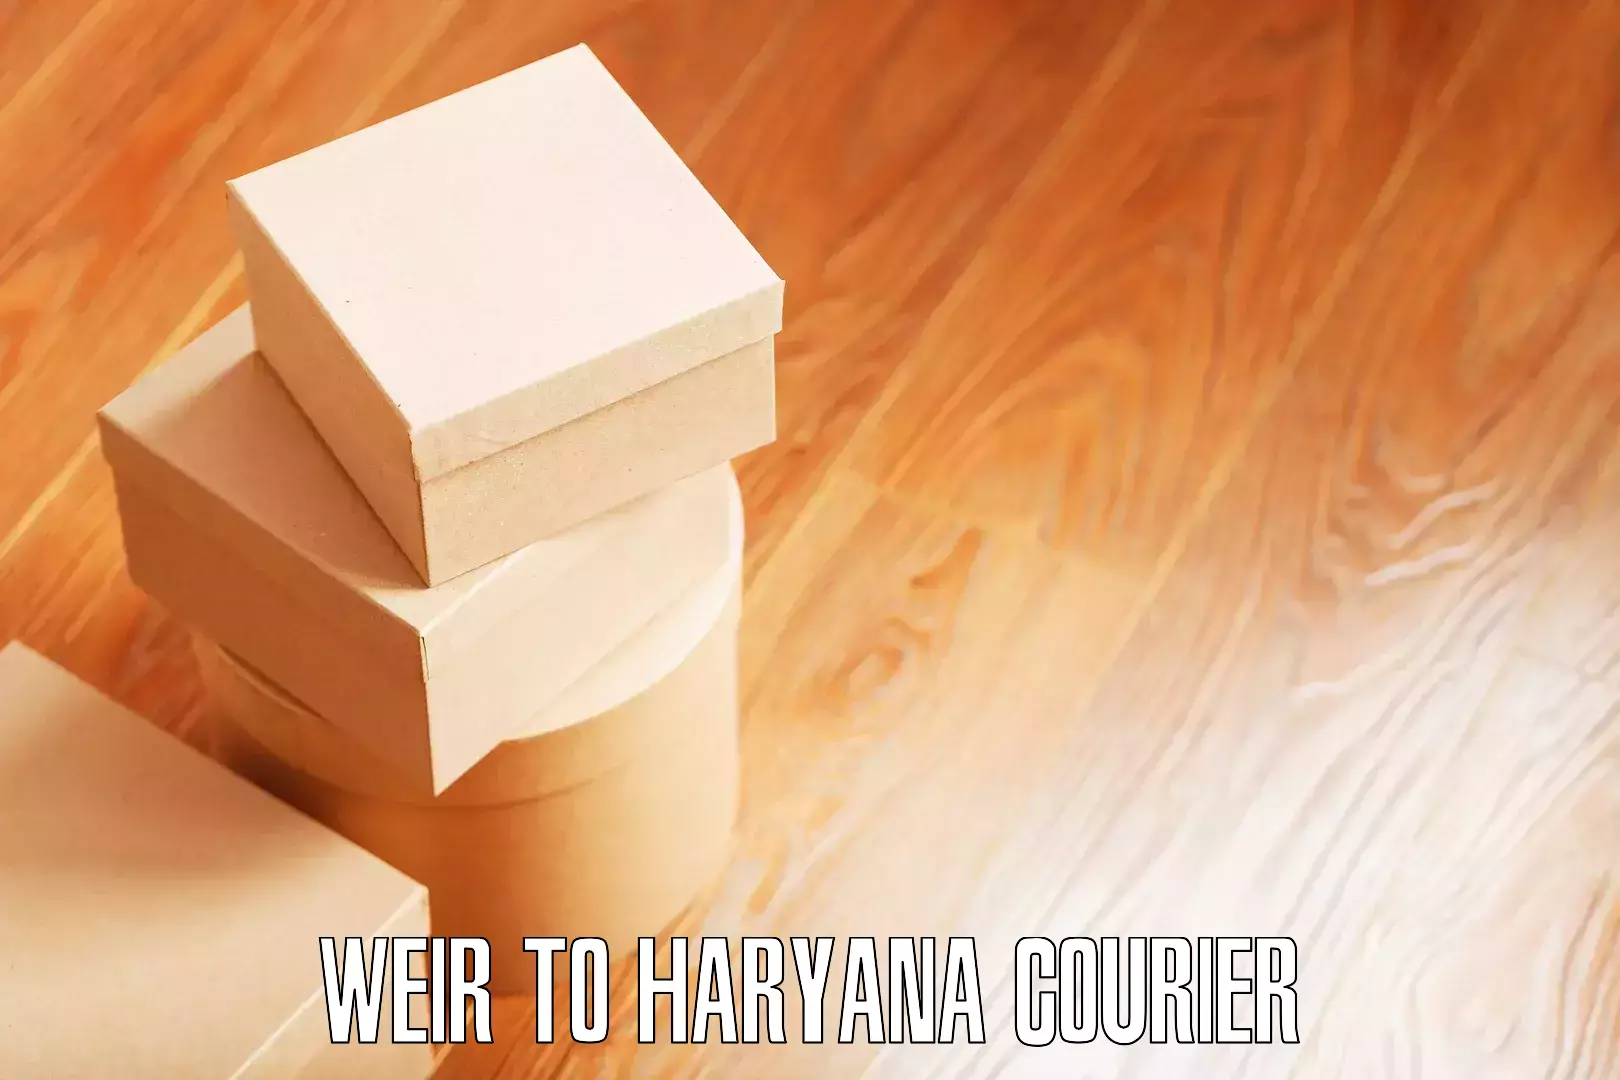 Professional furniture movers Weir to Haryana